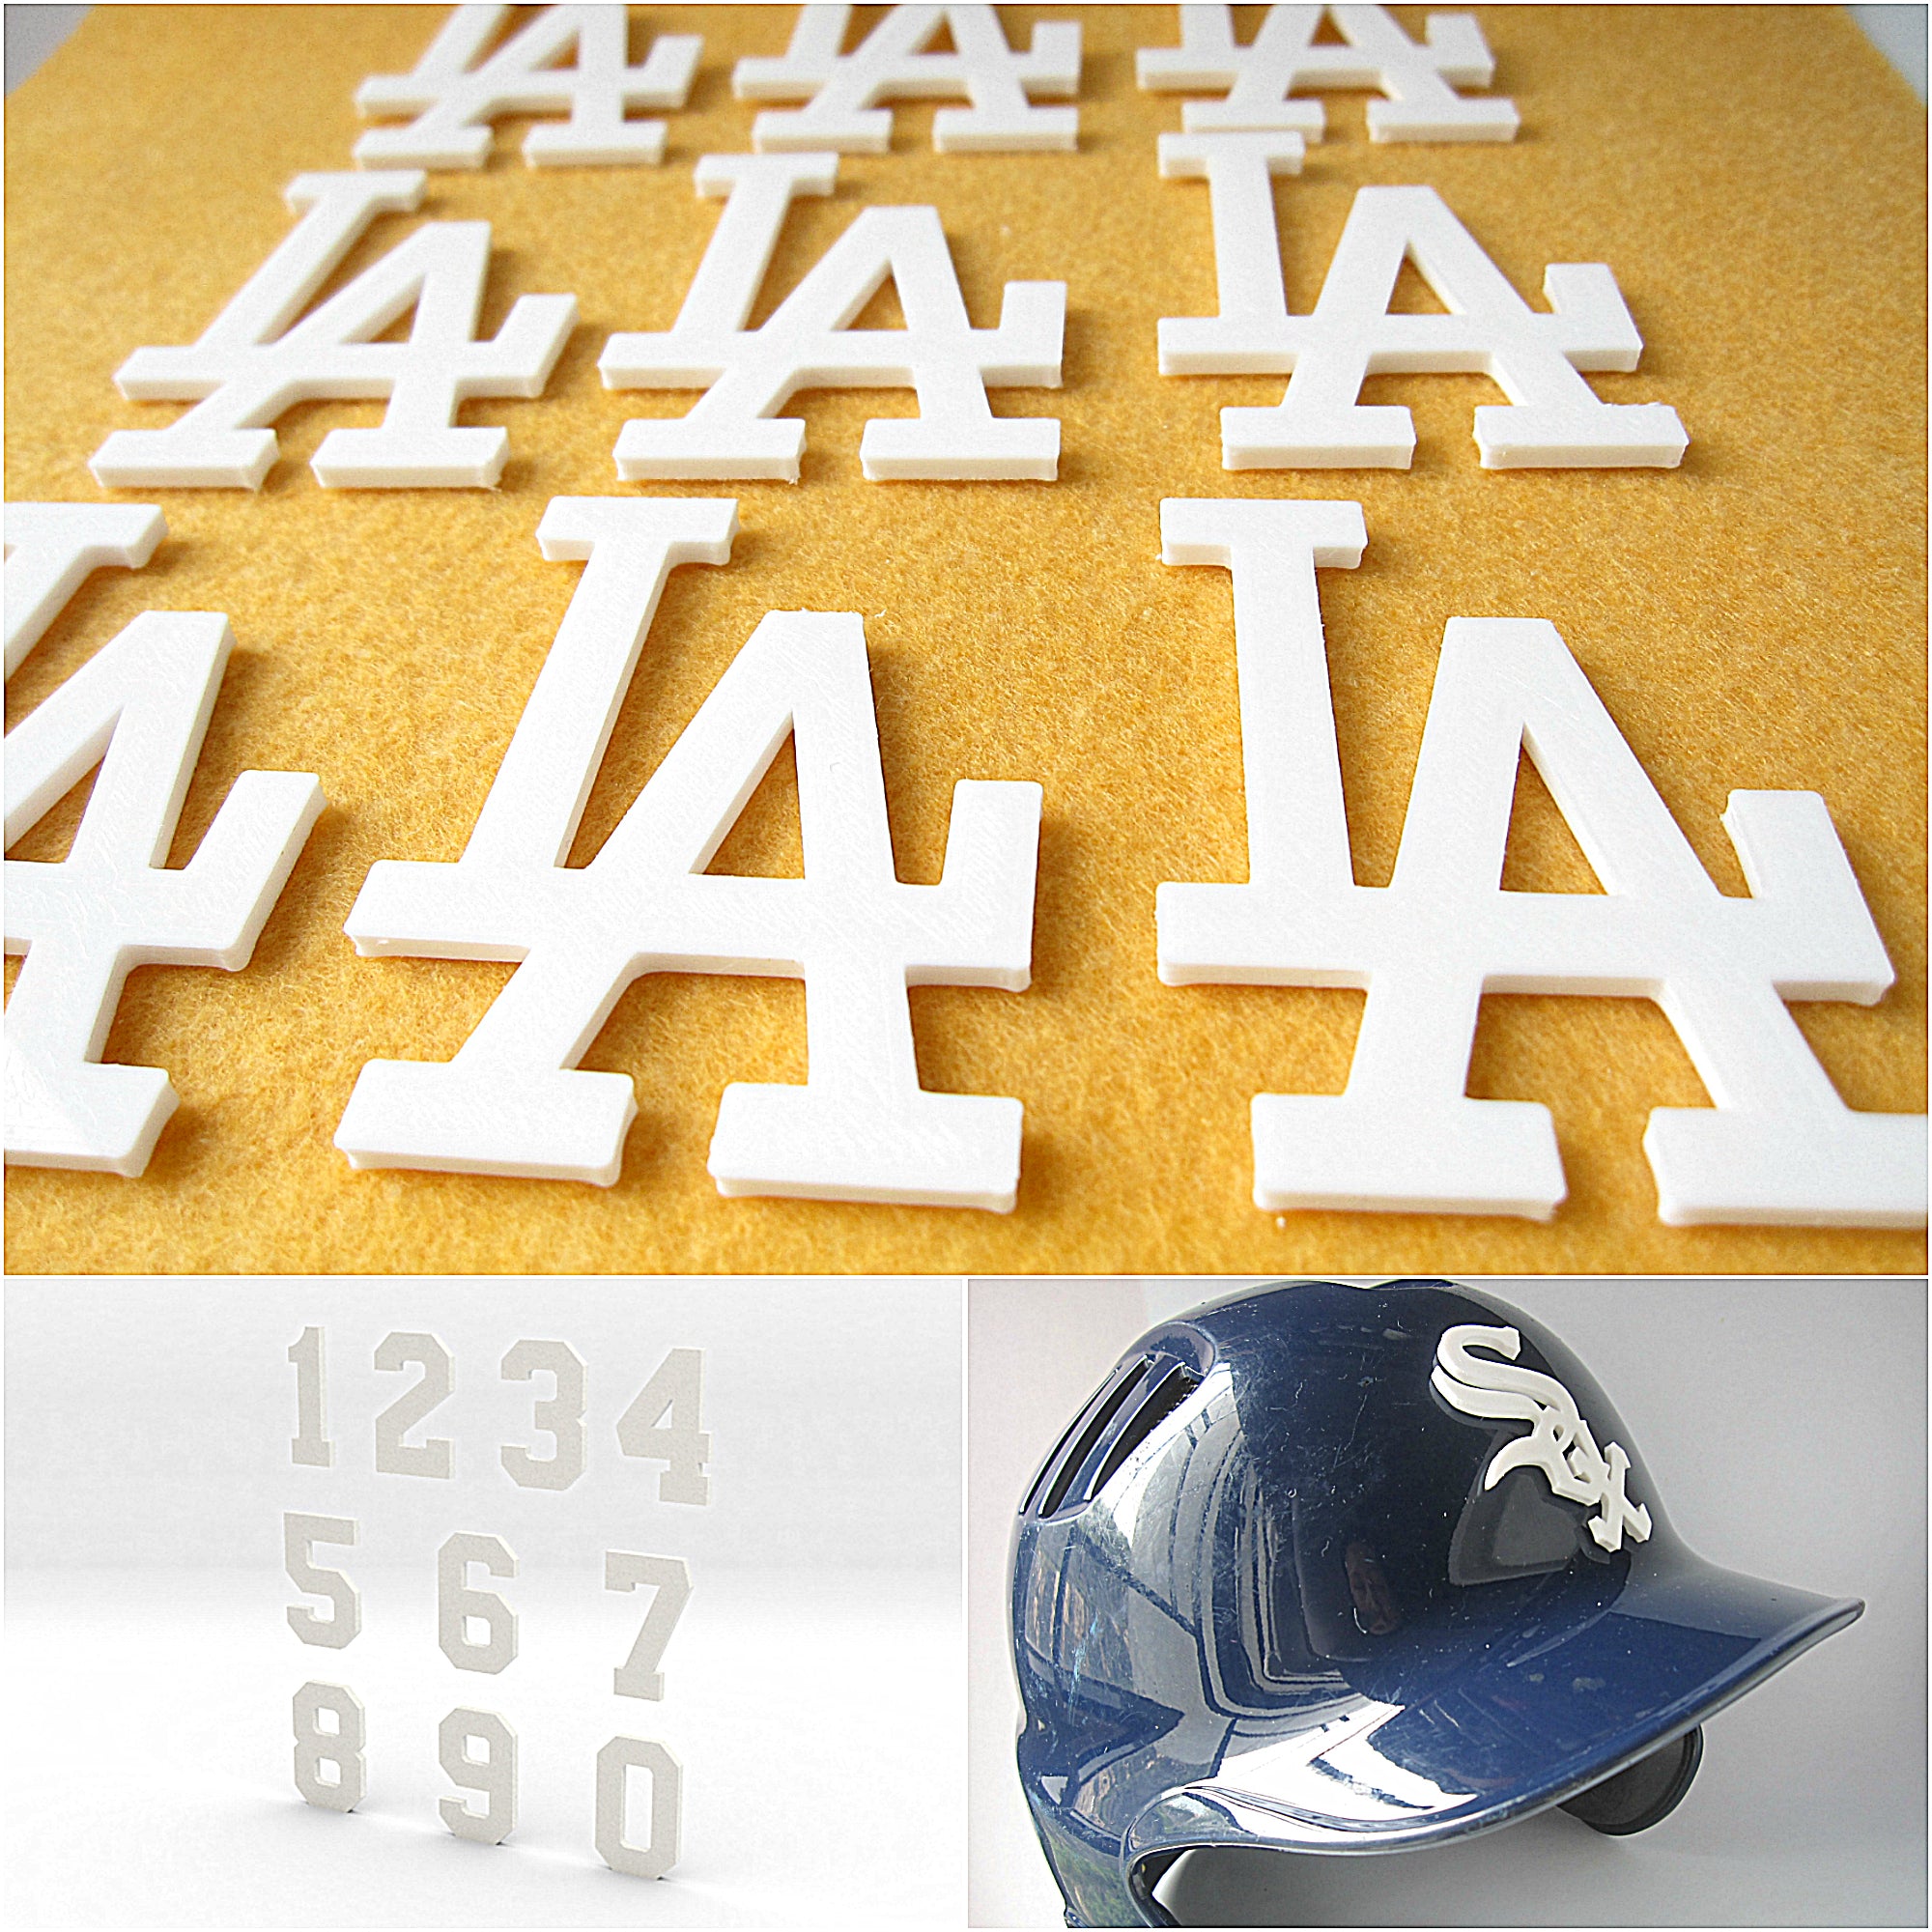 Los Angeles Dodgers Football Team Logo Personalized Name Christmas